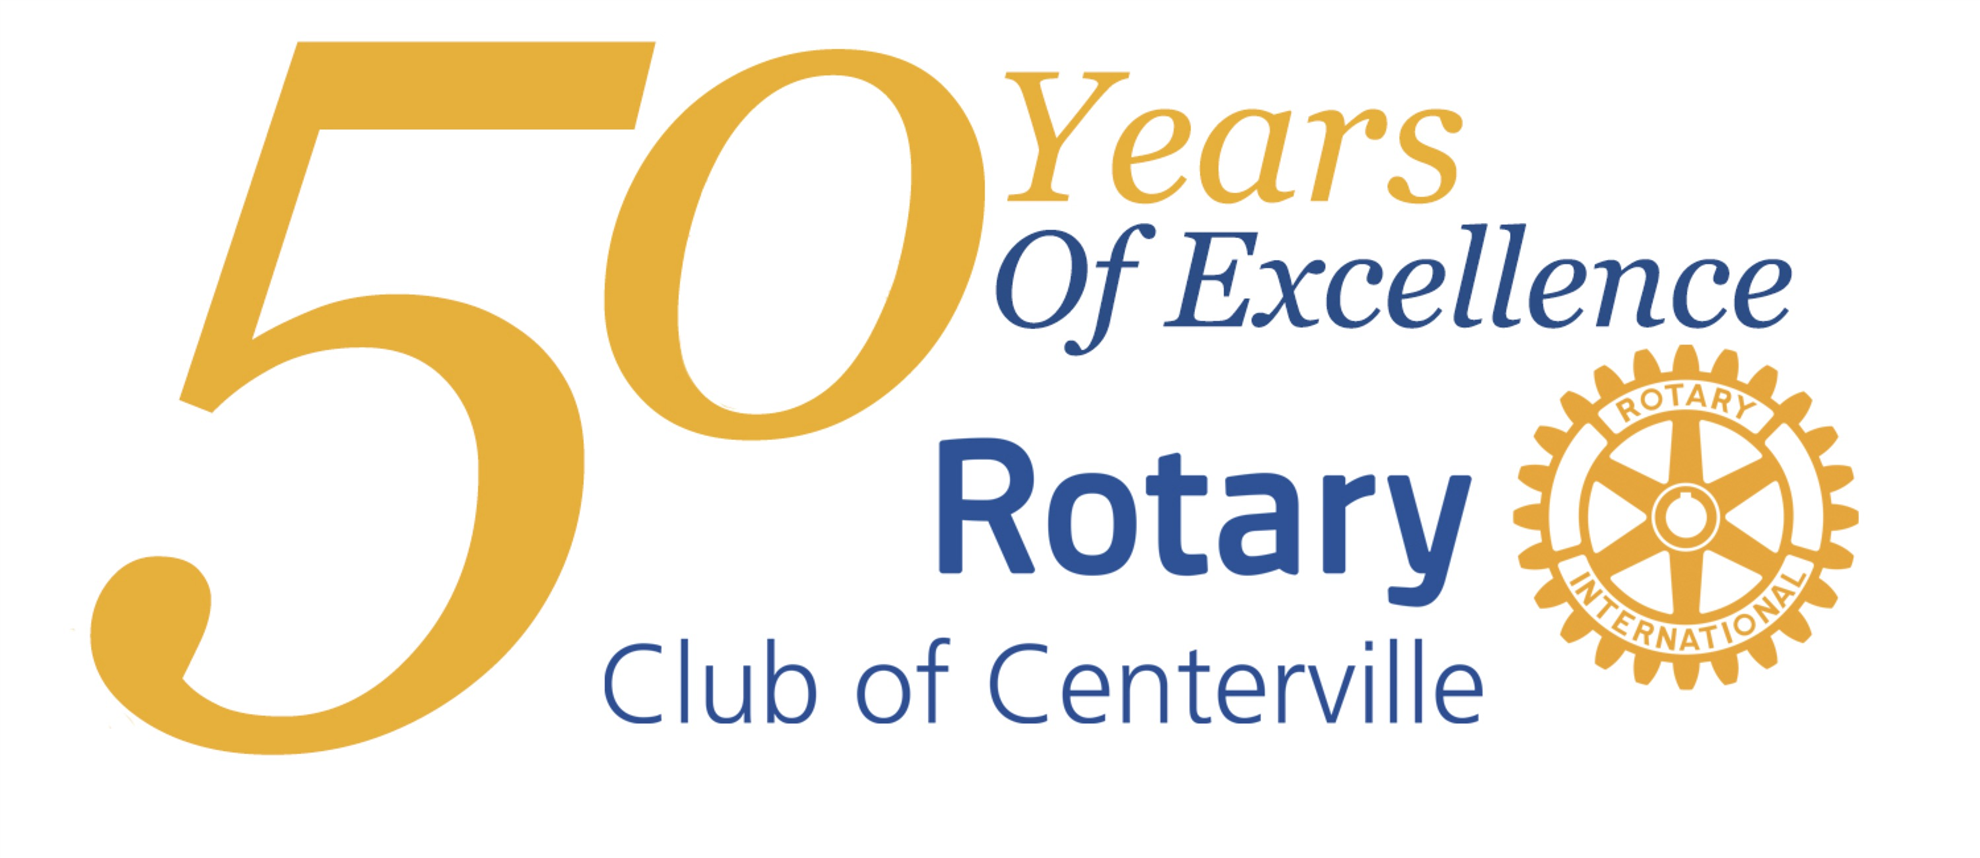 Welcome | Centerville Rotary Club